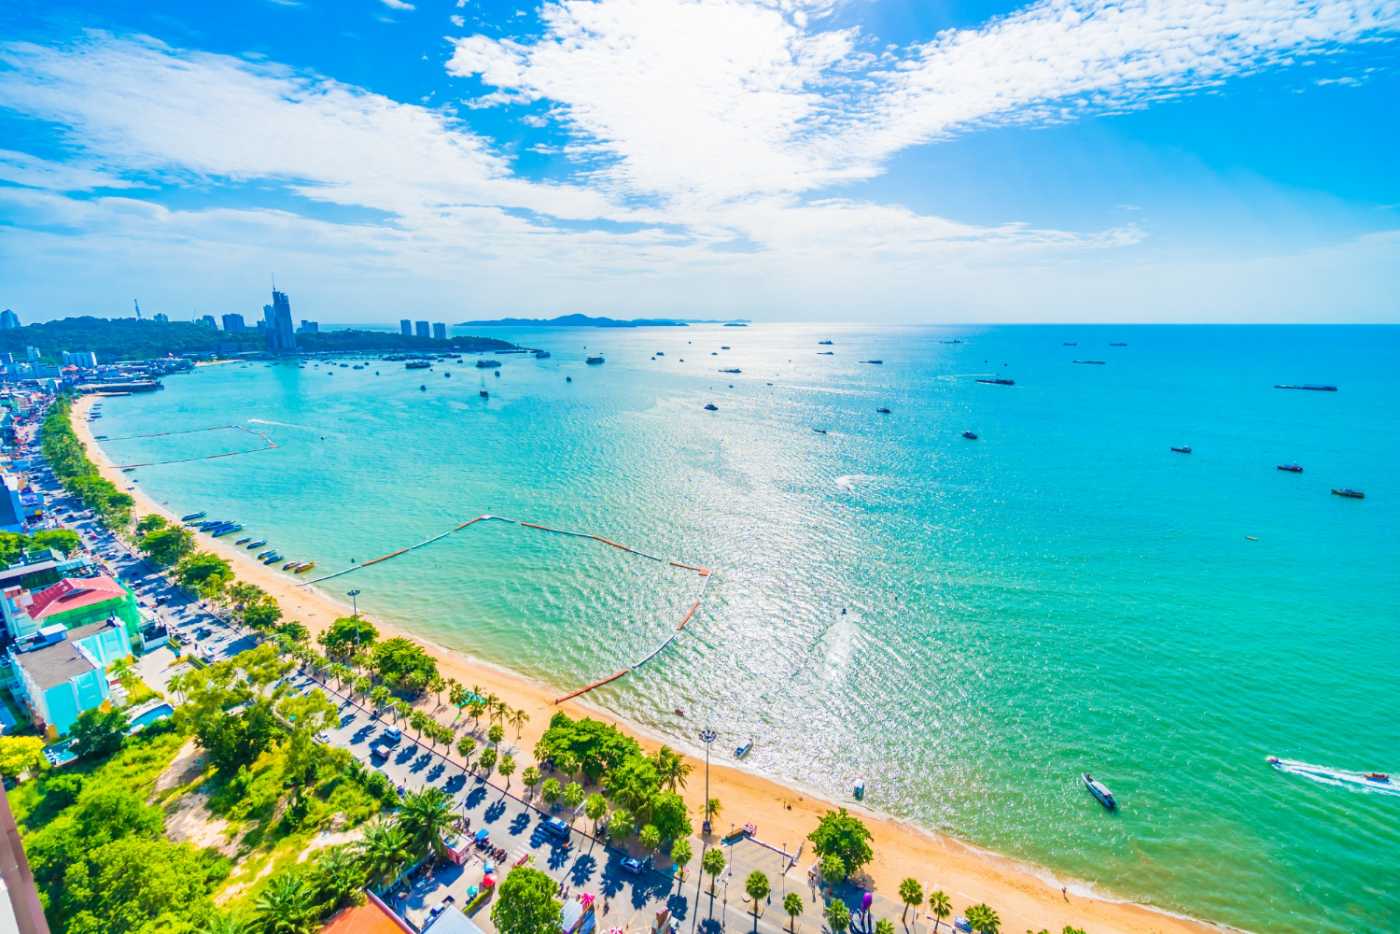 Scenic image of Pattaya Beach, capturing the serene waters, sandy shores, and a vibrant atmosphere, reflecting the beauty and allure of this popular destination